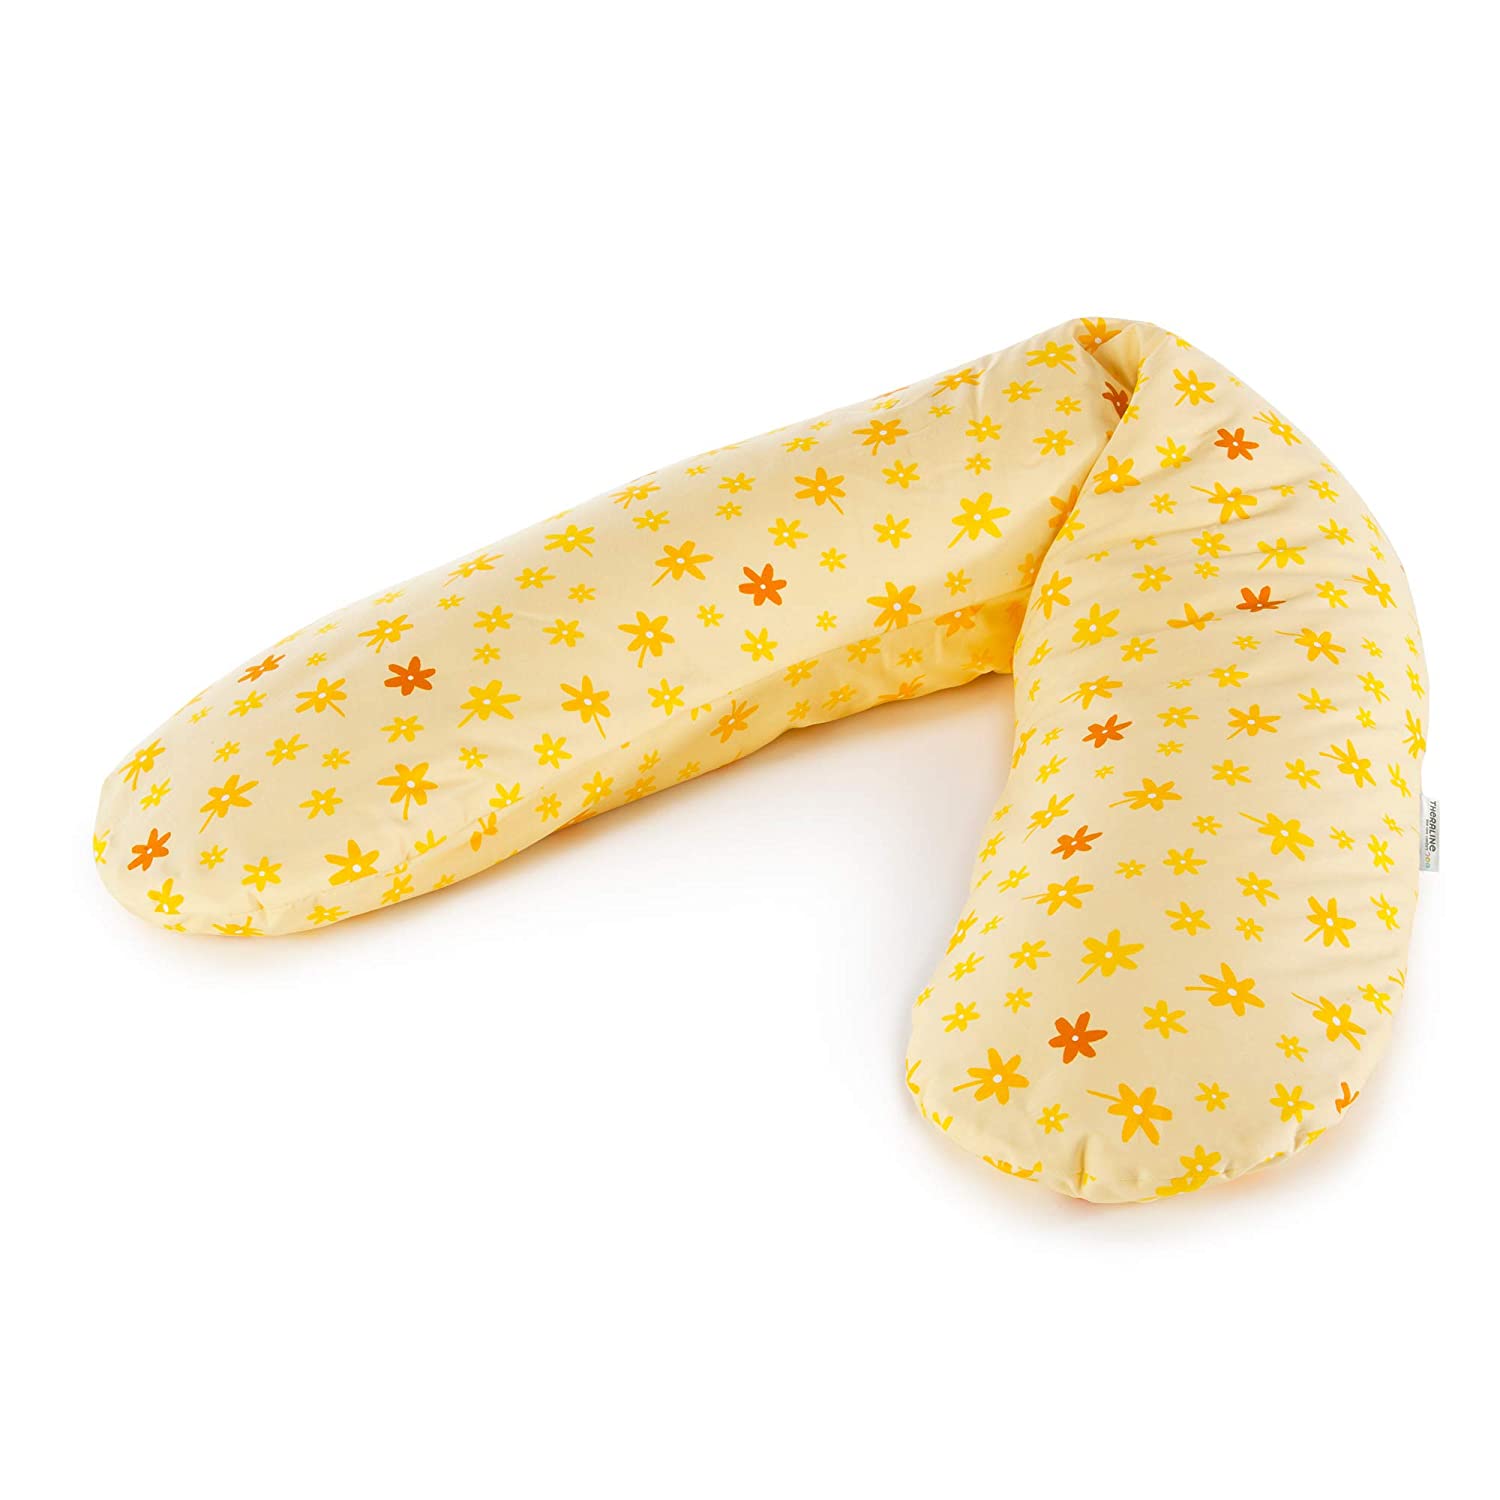 Theraline Nursing pillow with Micro Beads Flowers Yellow